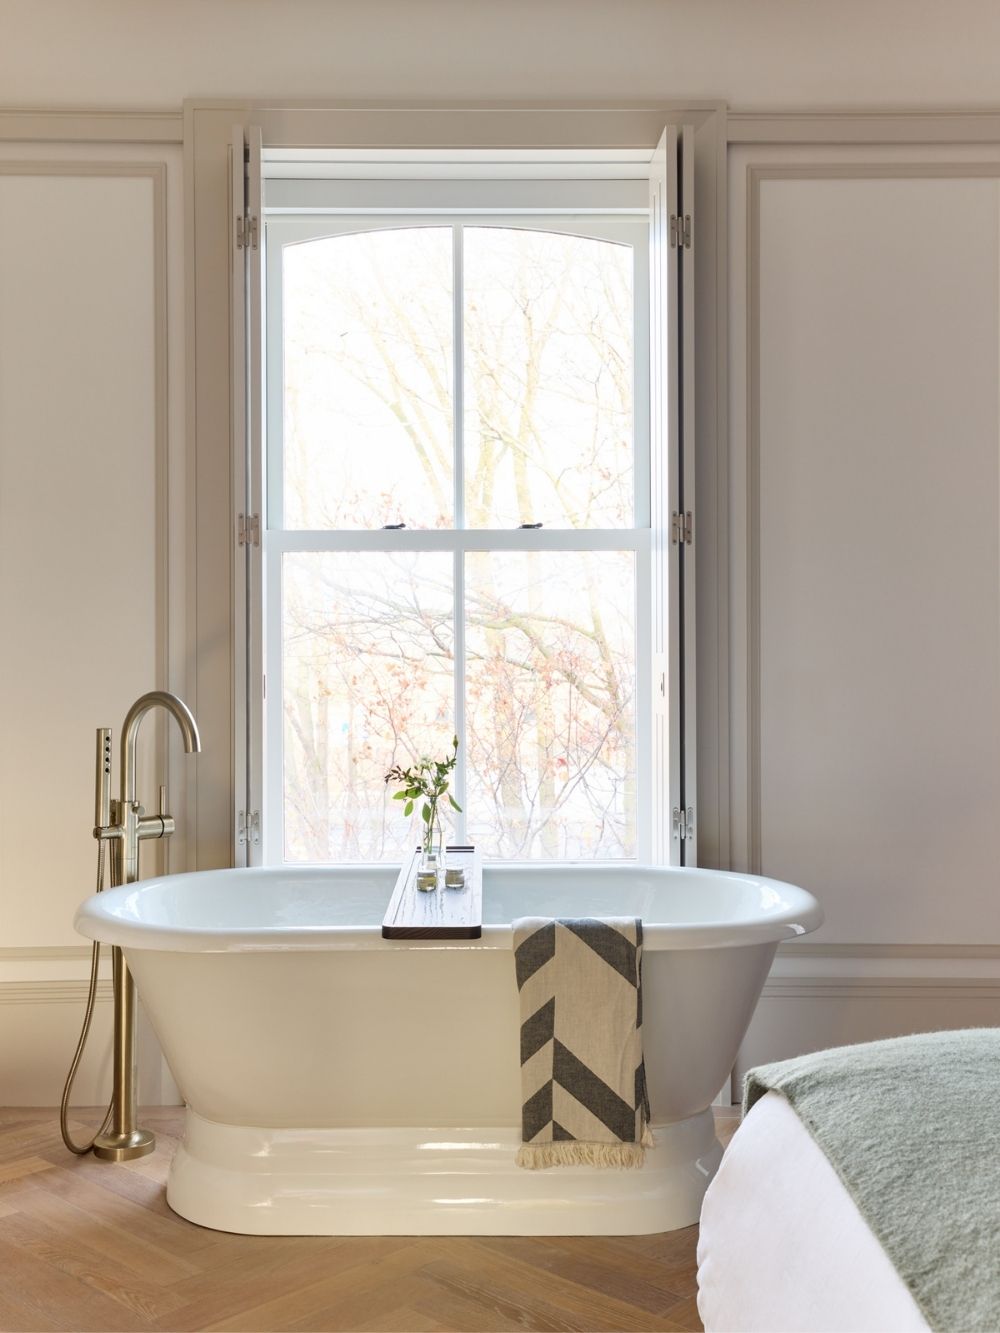 soaker tub in front of window, grey and white tasseled throw over the side